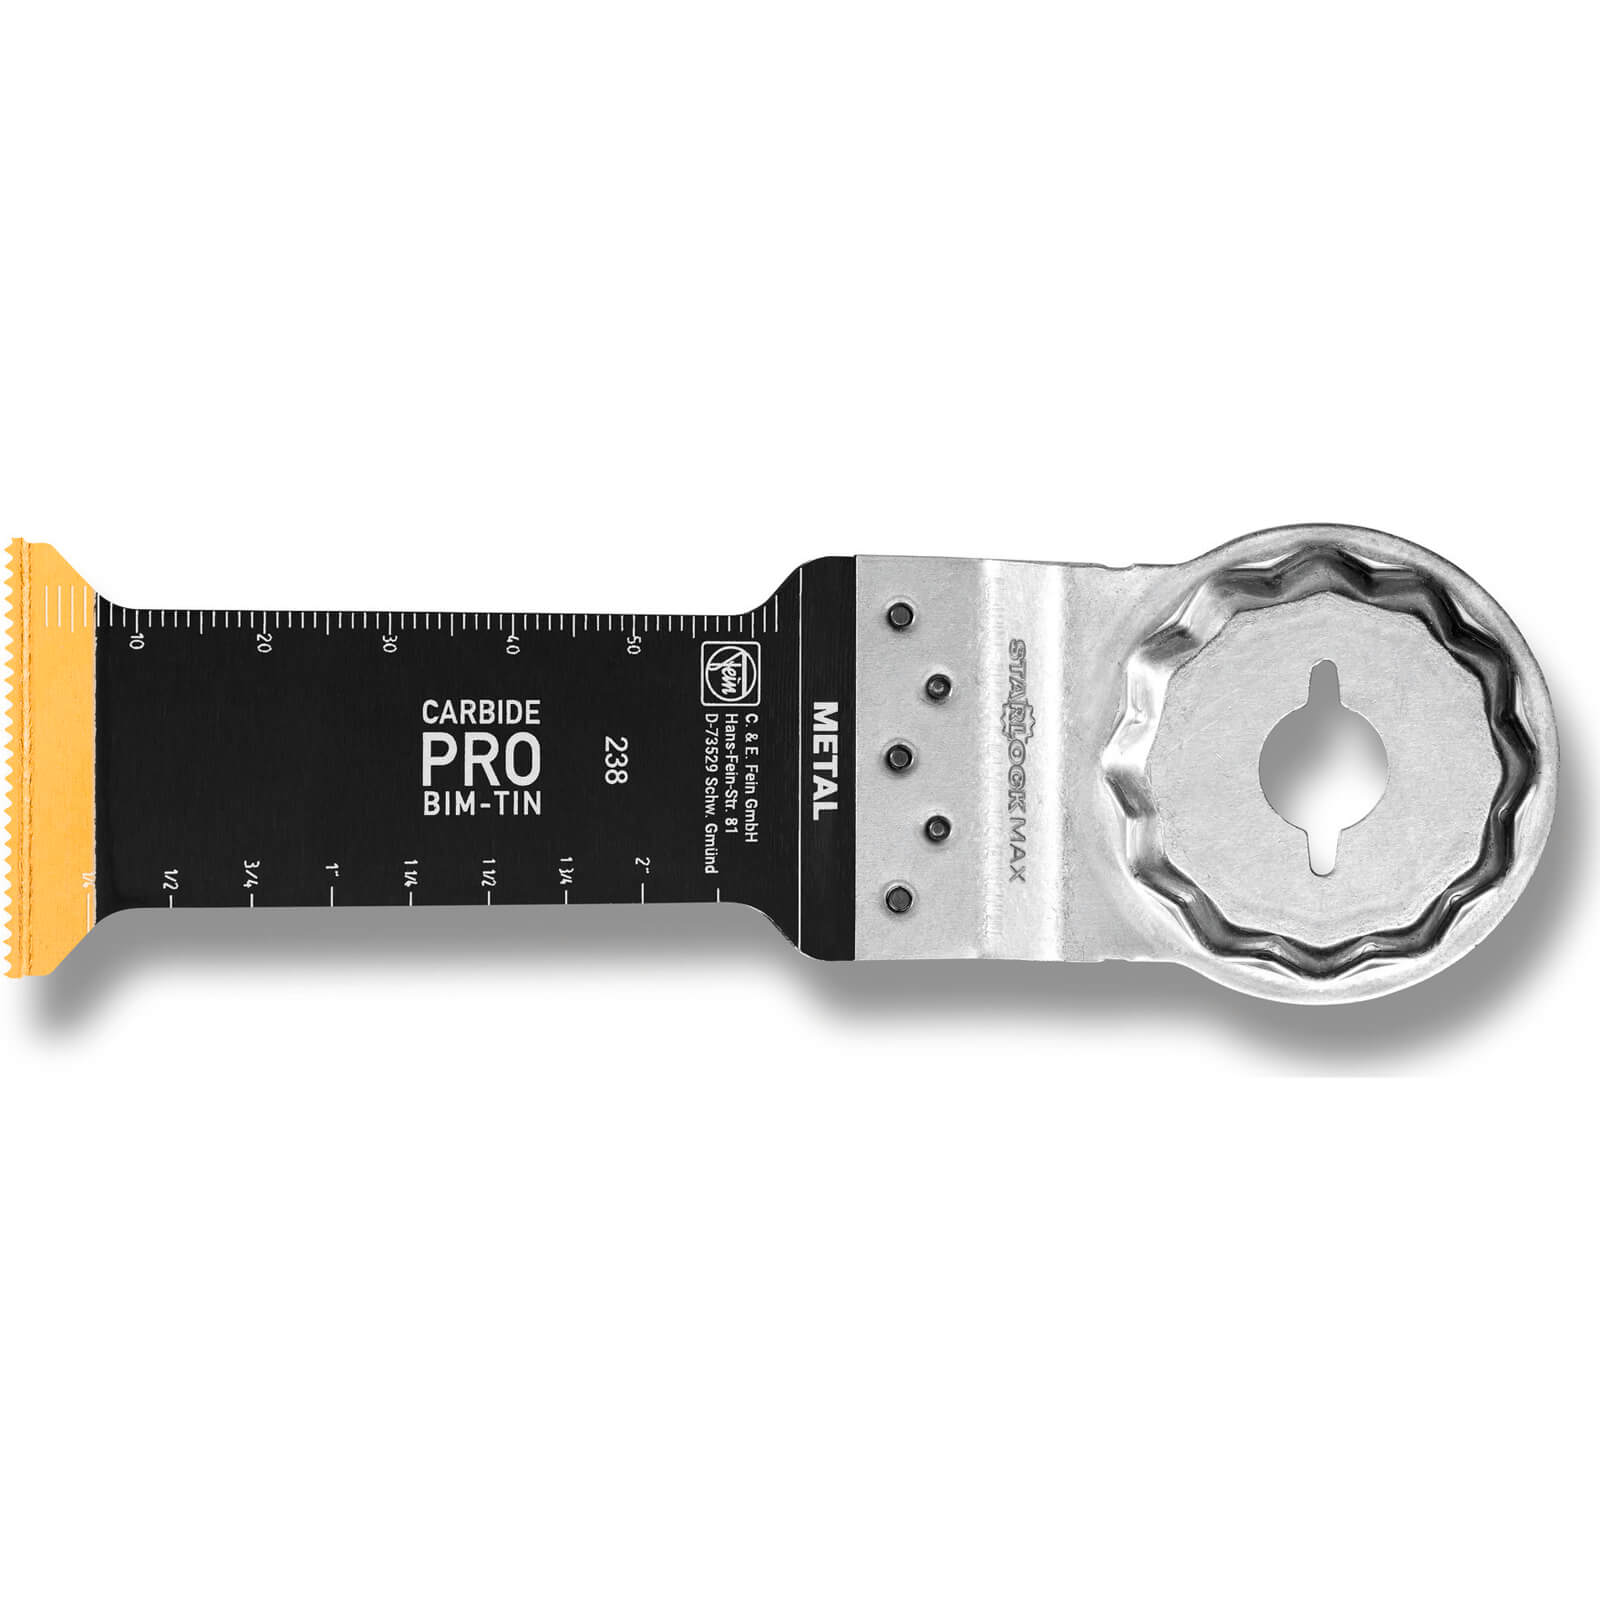 Image of Fein E-Cut Carbide Pro Starlock Max Oscillating Multi Tool Plunge Saw Blade 32mm Pack of 3